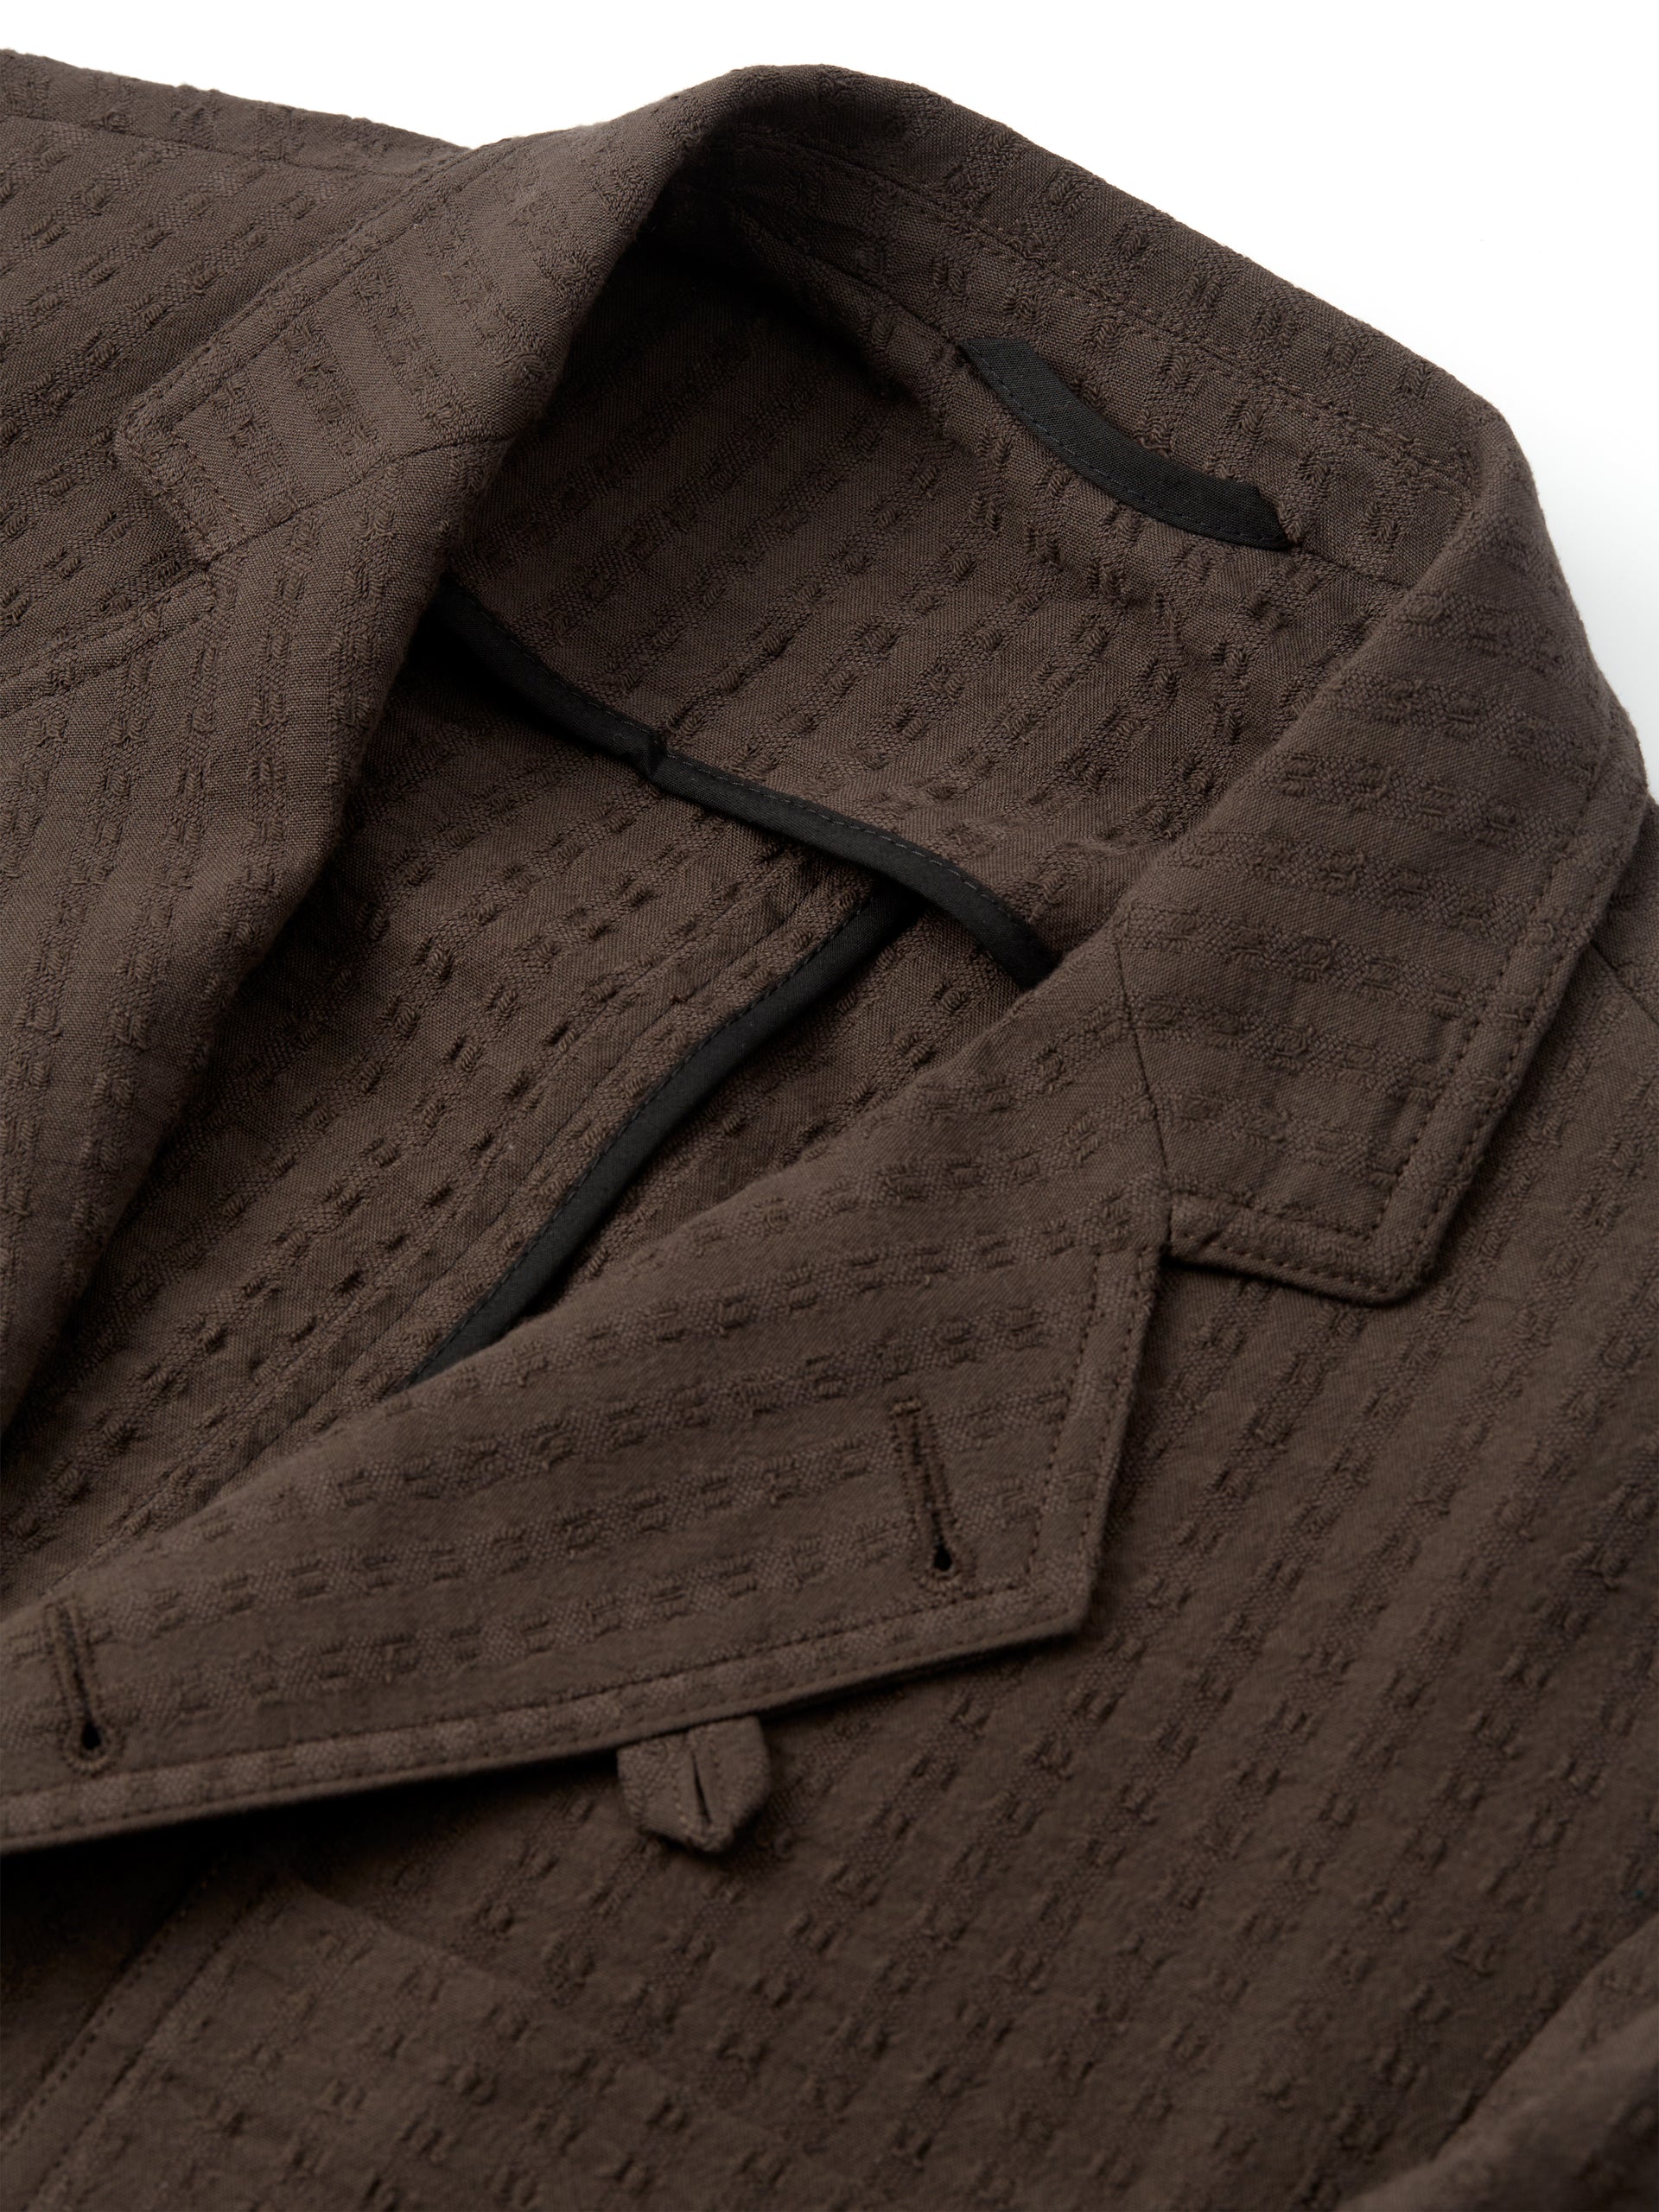 Brown Sampson Solms Suit